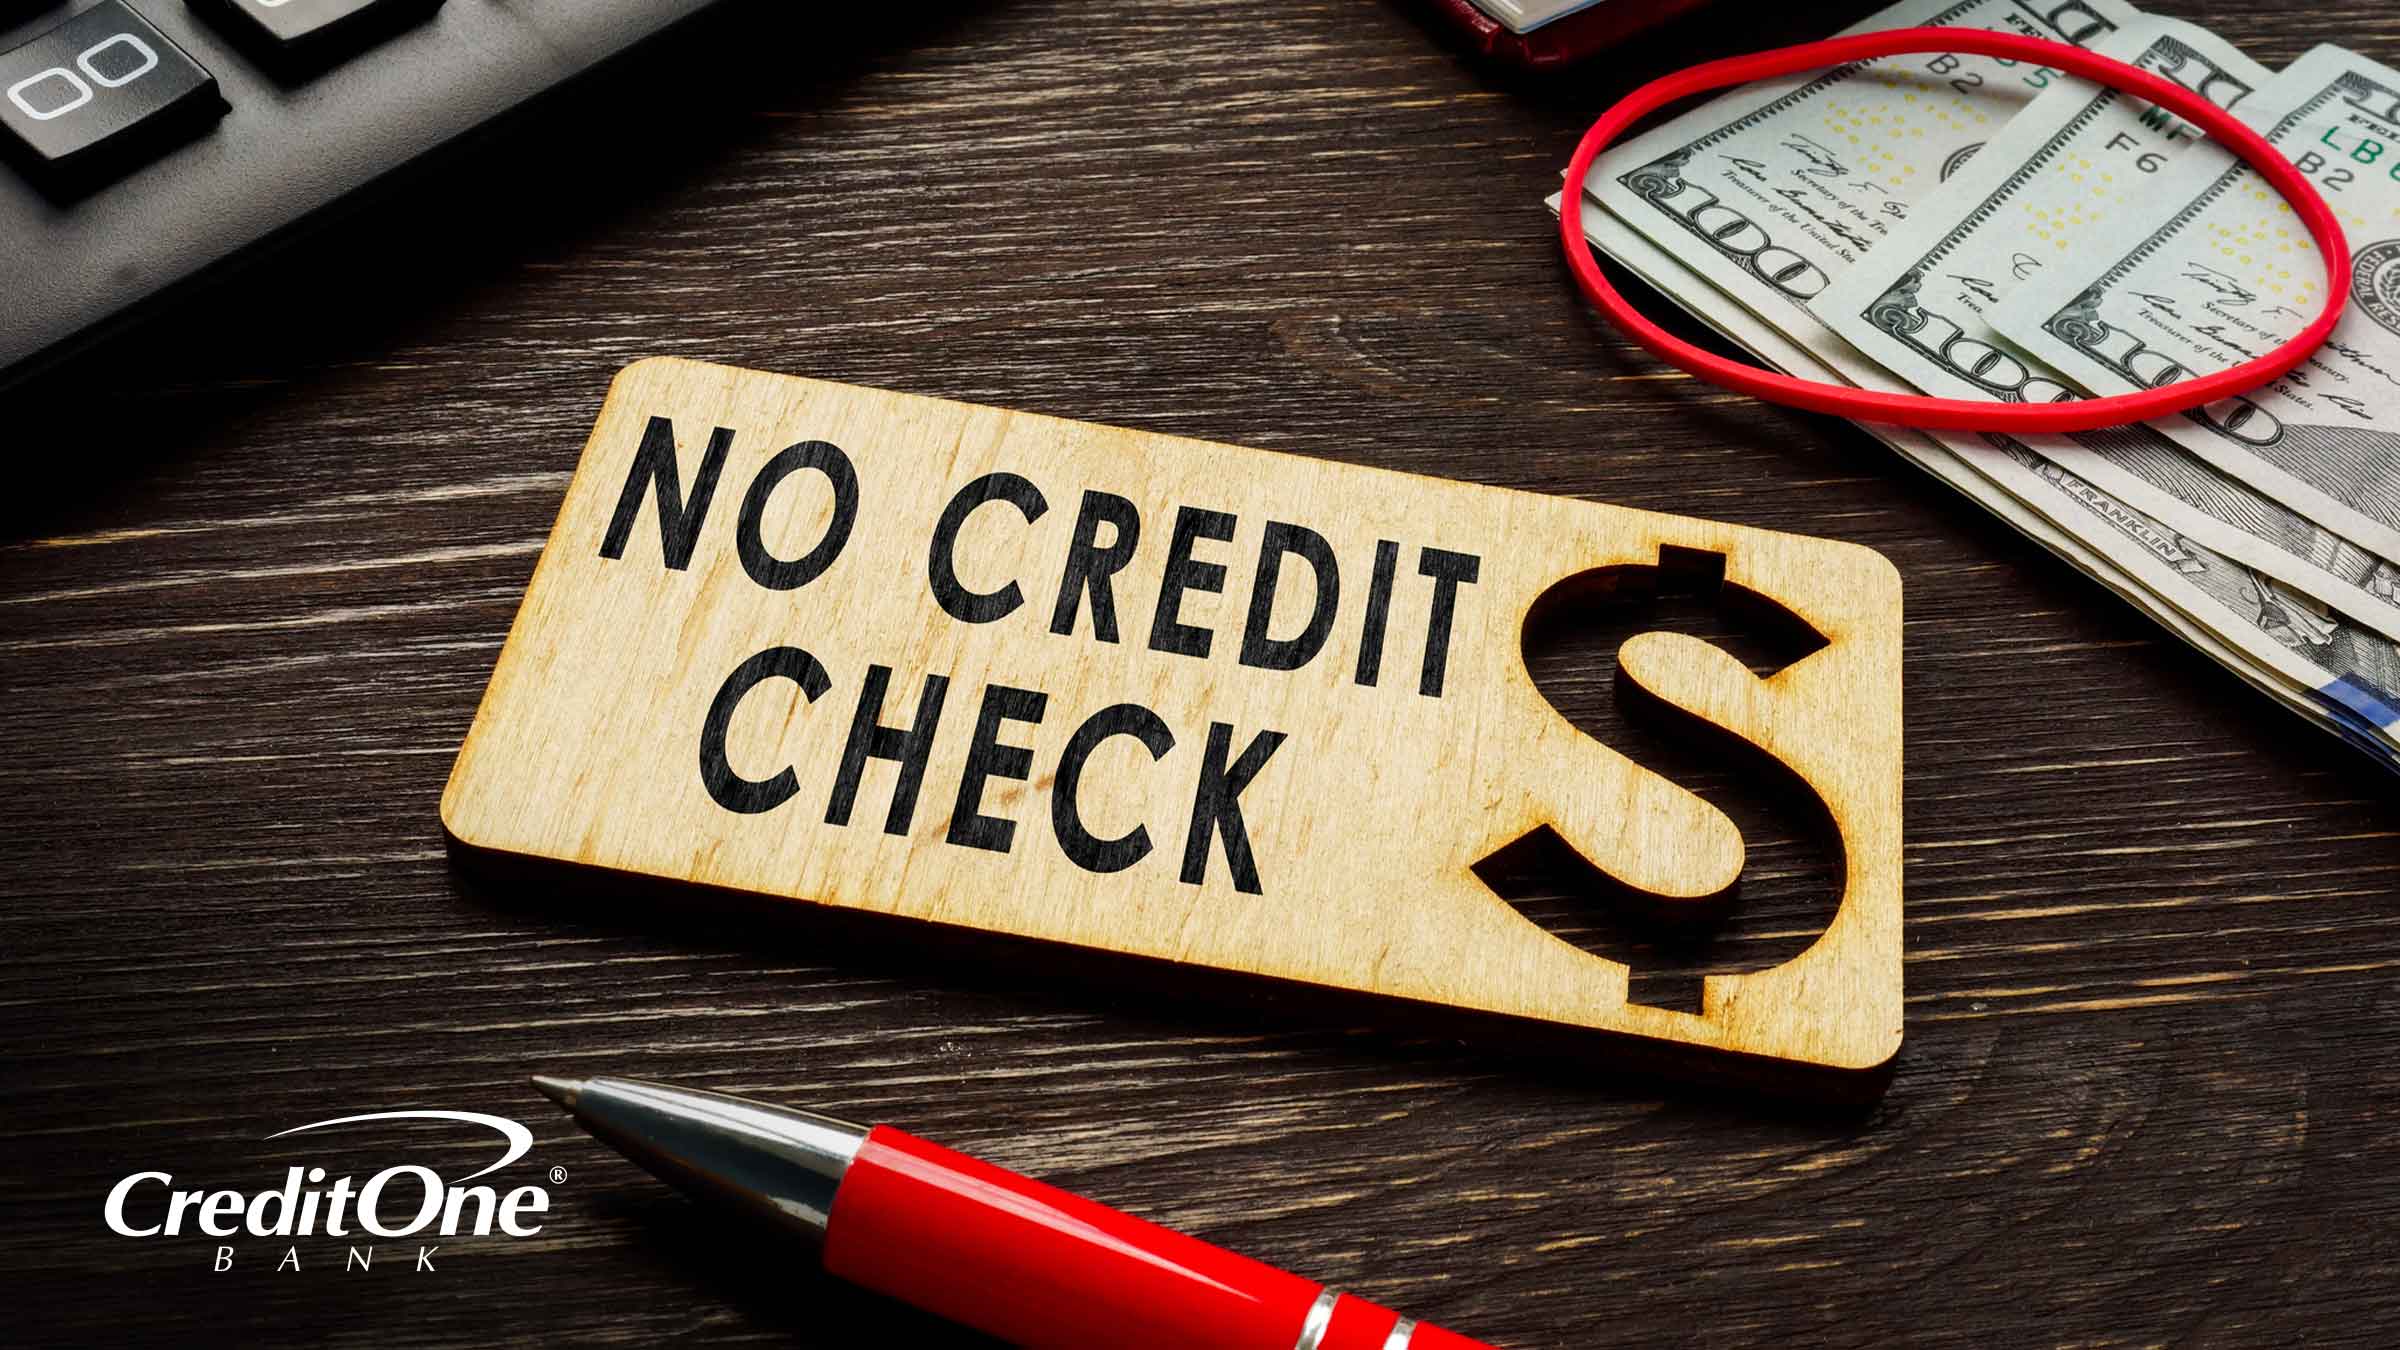 A sign beside a calculator and stack of money reads “No Credit Check” which indicates the process of getting credit without a hard pull. 